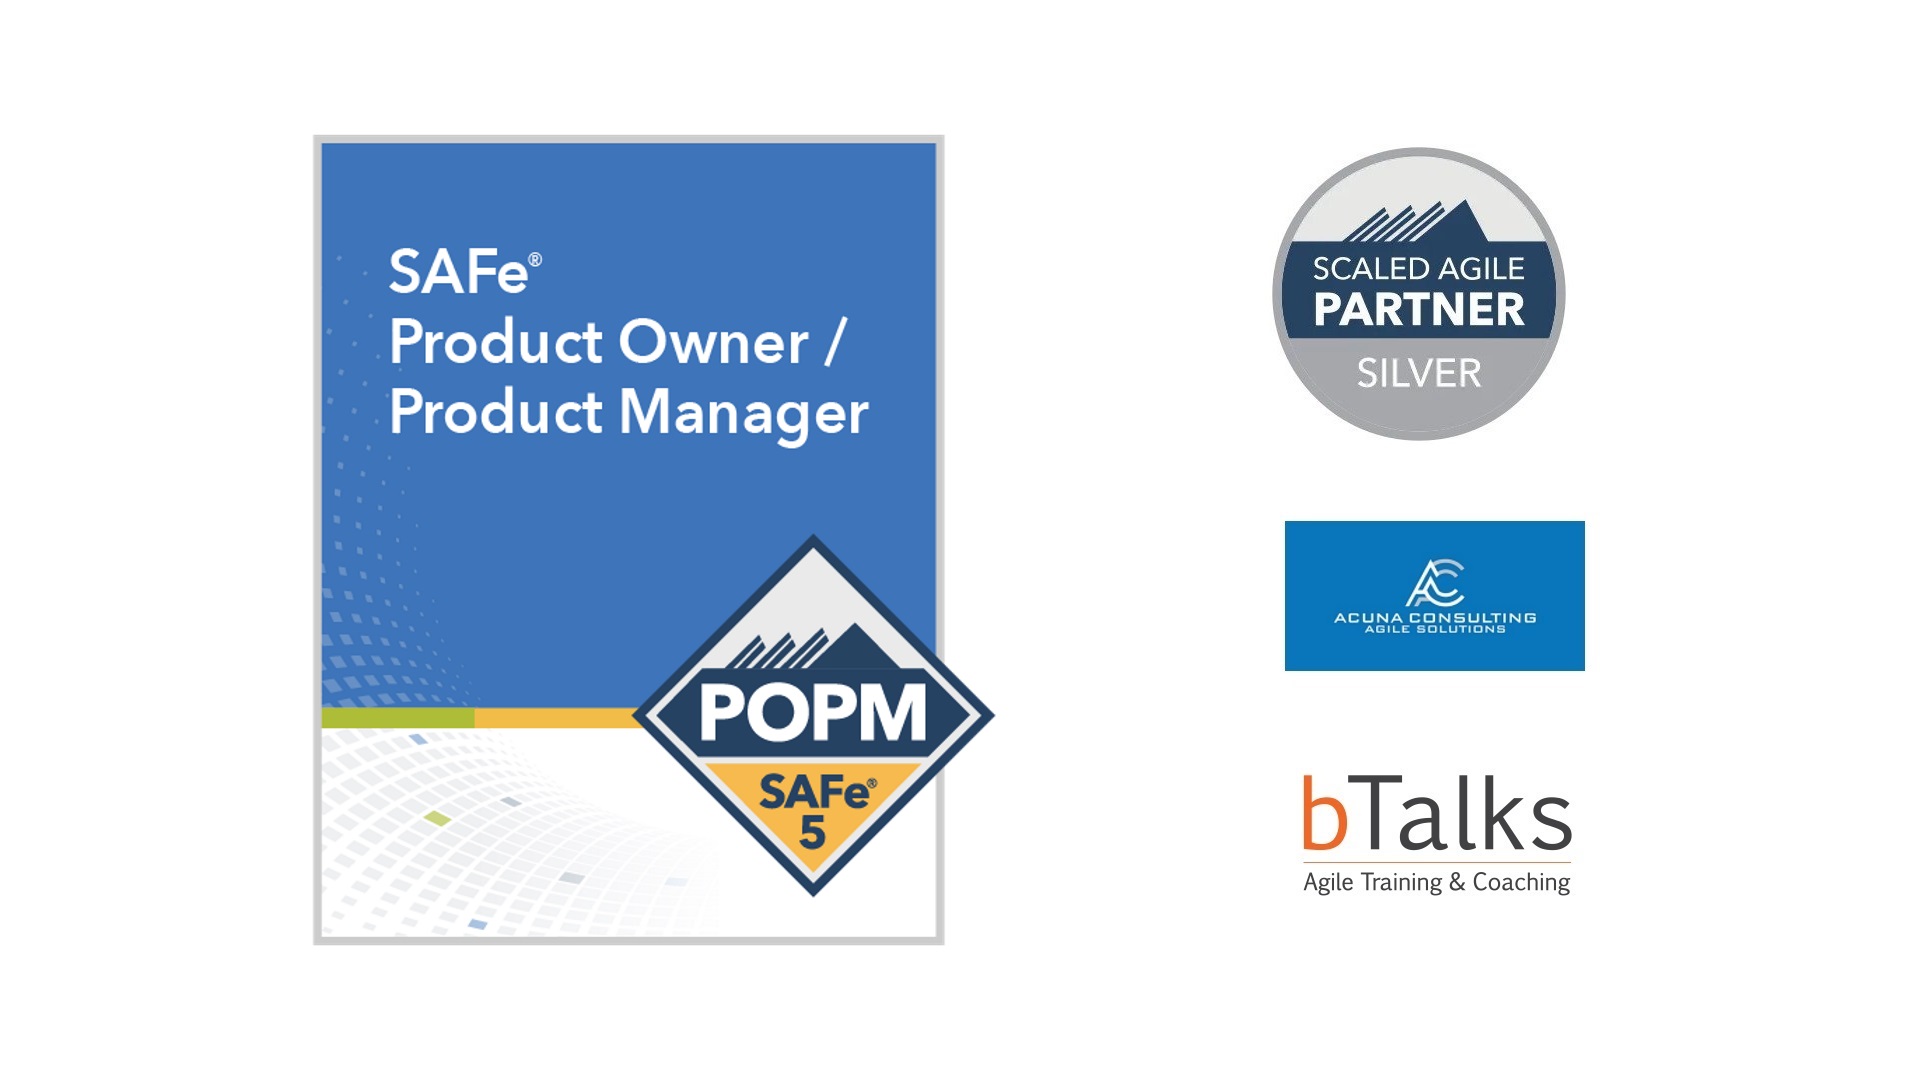 SAFe® Product Owner/ Product Manager